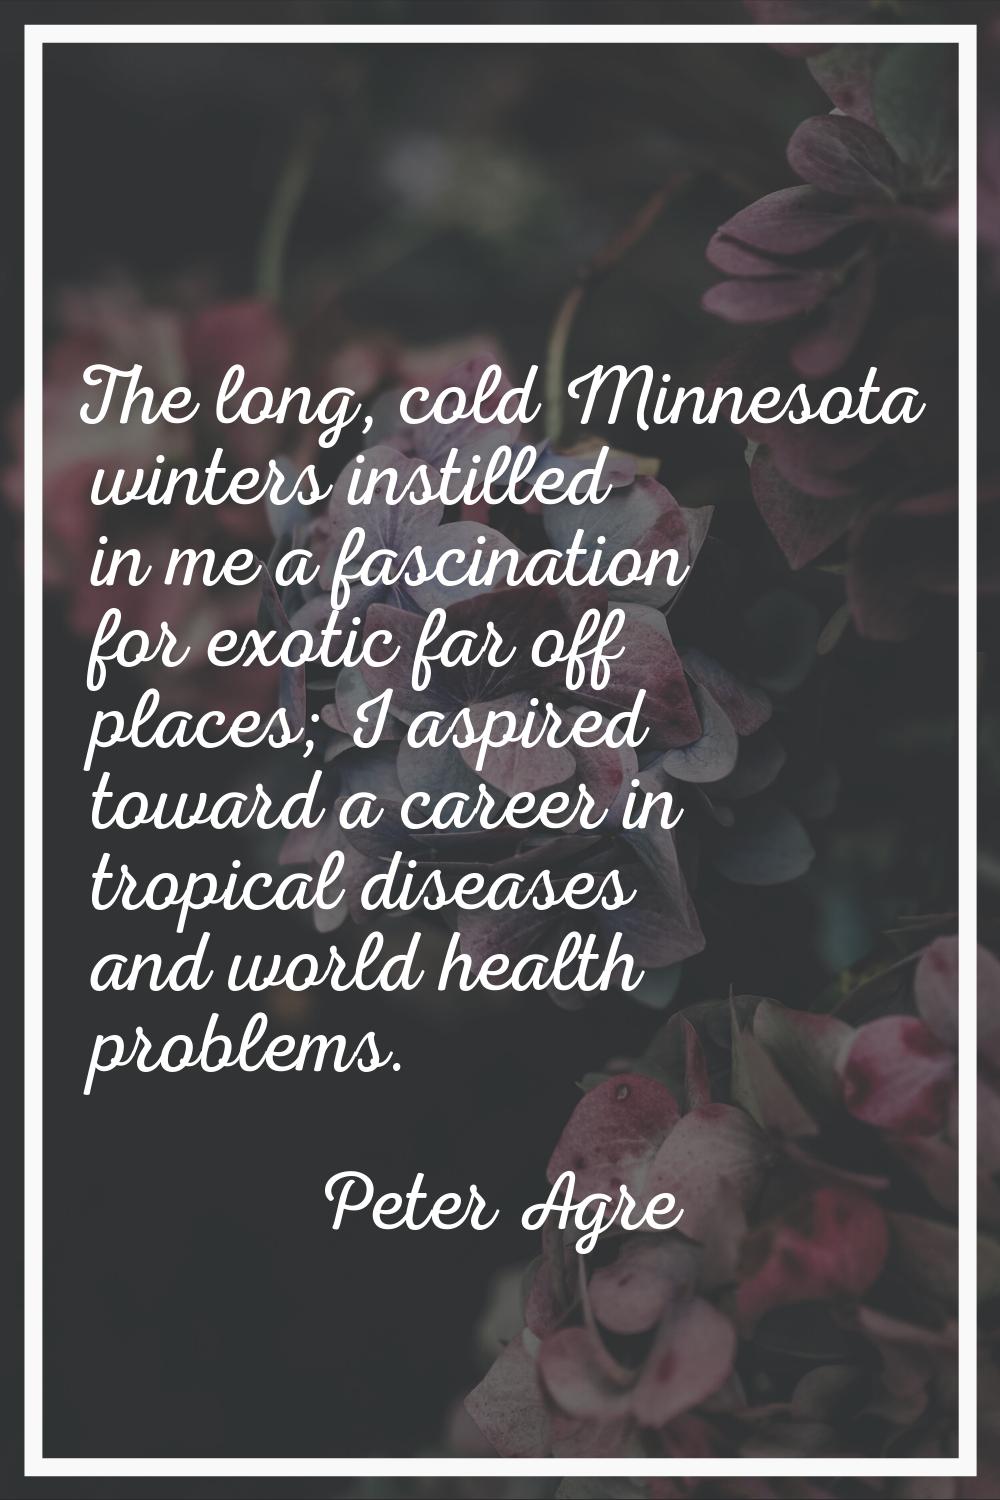 The long, cold Minnesota winters instilled in me a fascination for exotic far off places; I aspired